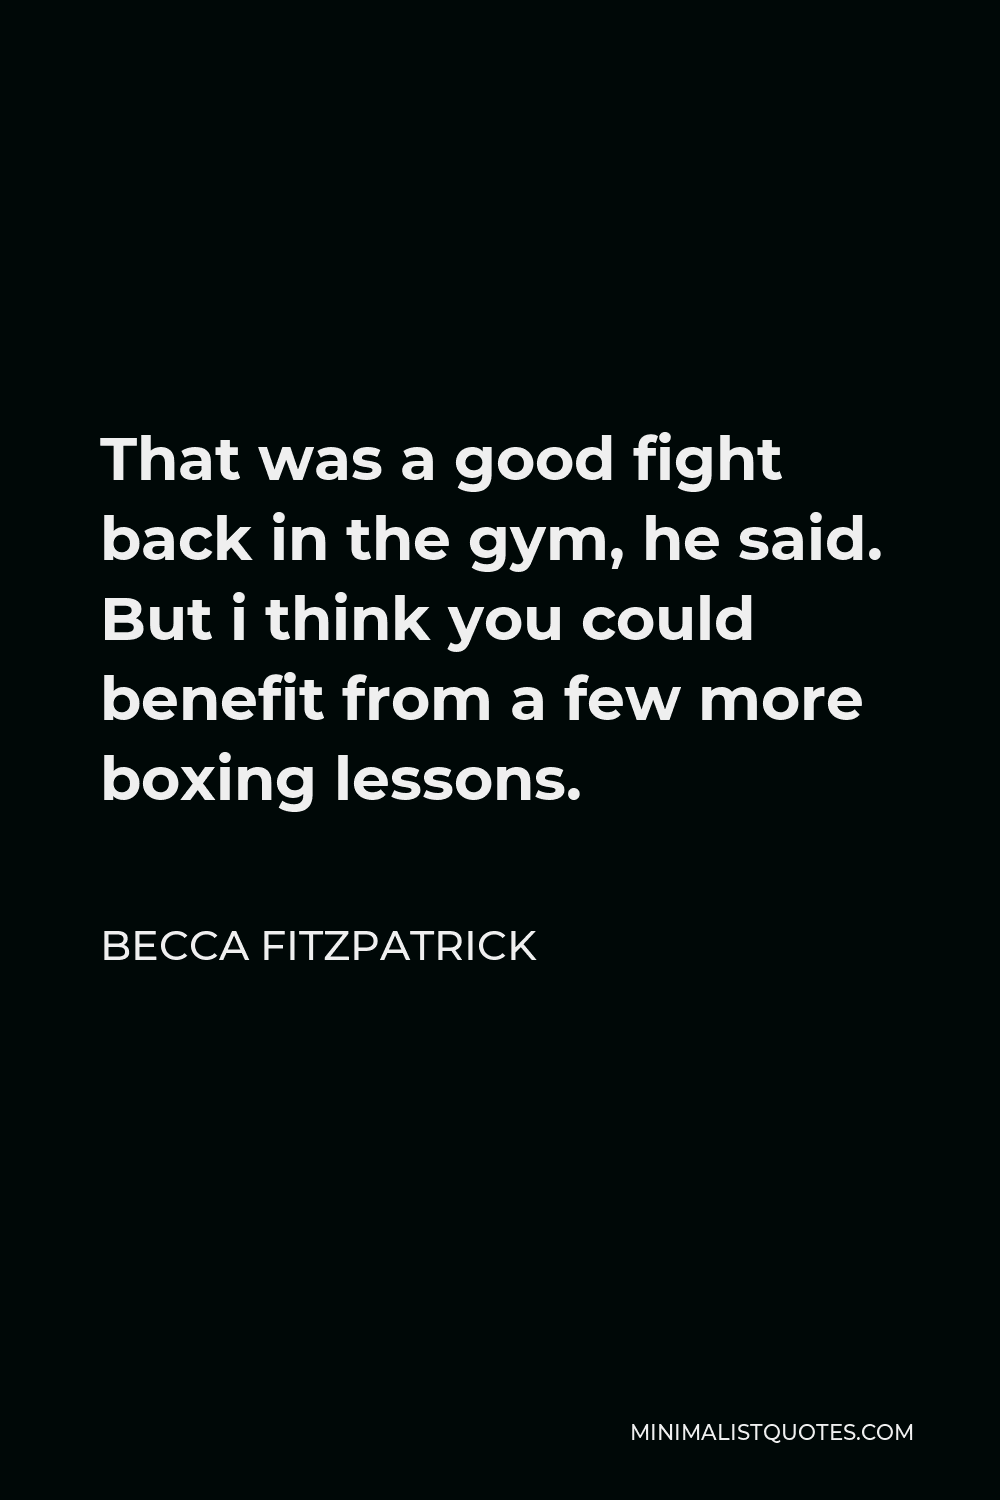 Becca Fitzpatrick Quote - That was a good fight back in the gym, he said. But i think you could benefit from a few more boxing lessons.